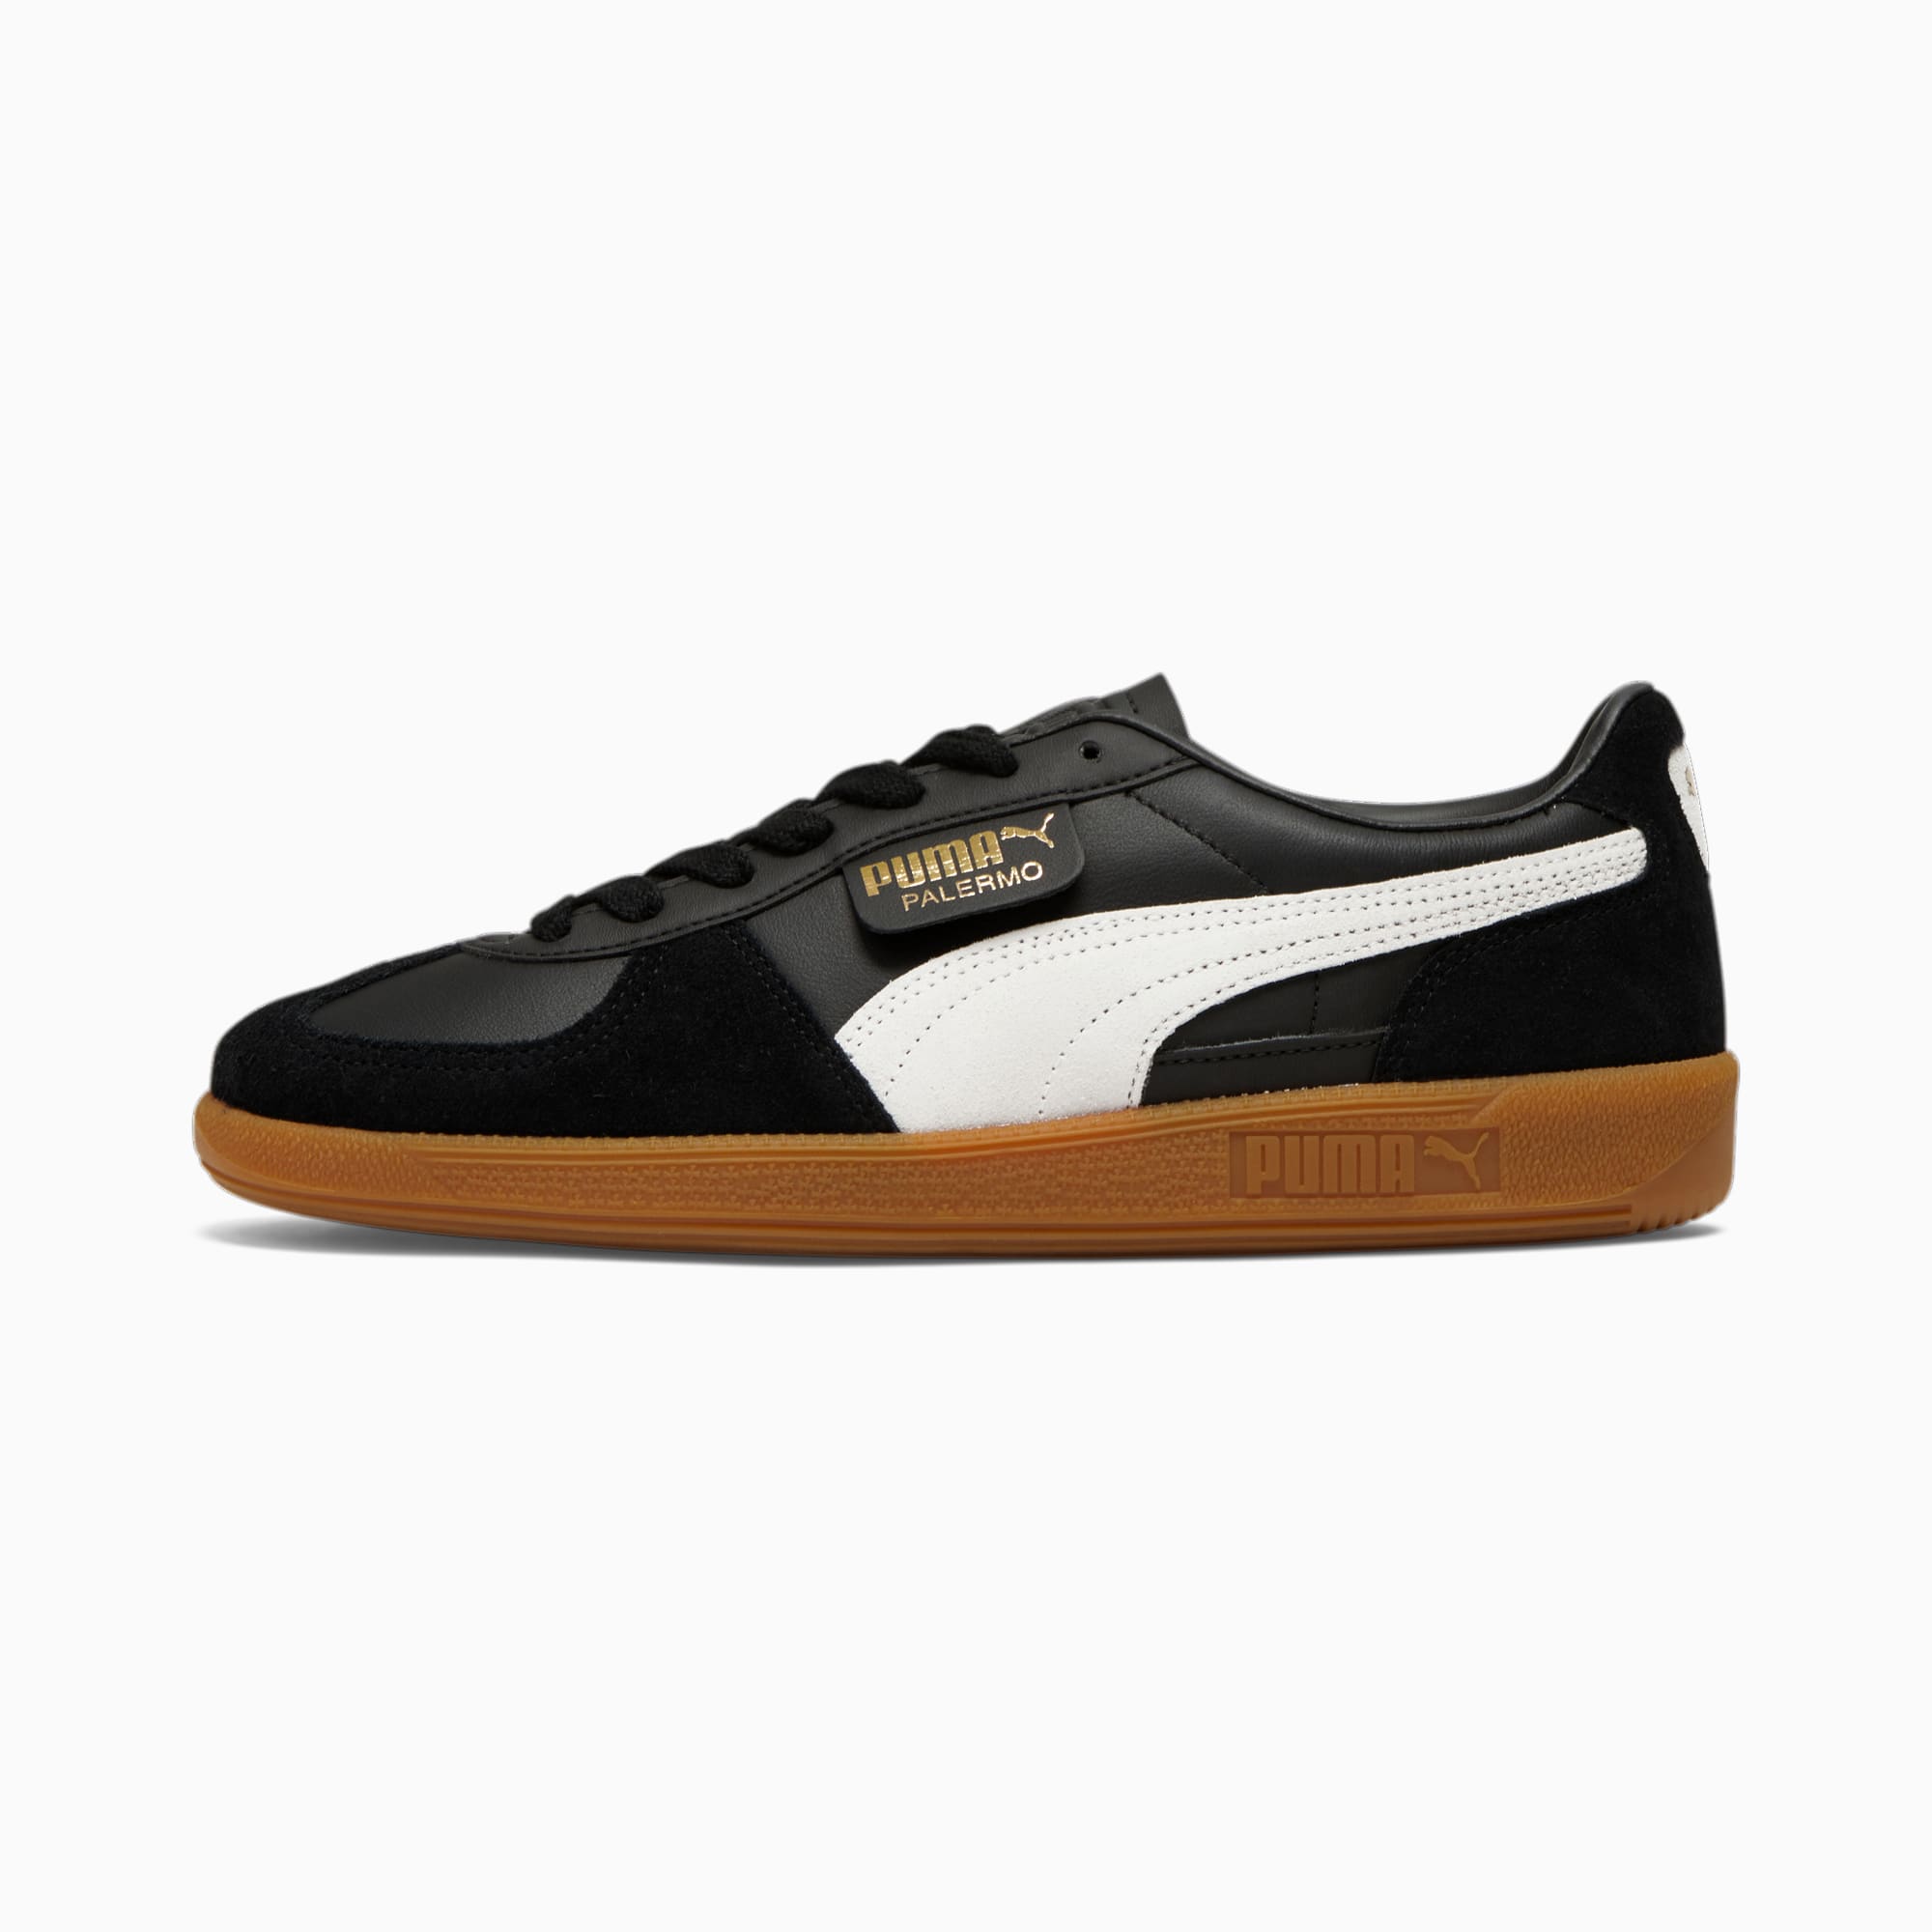 Palermo Leather Men's Sneakers | PUMA